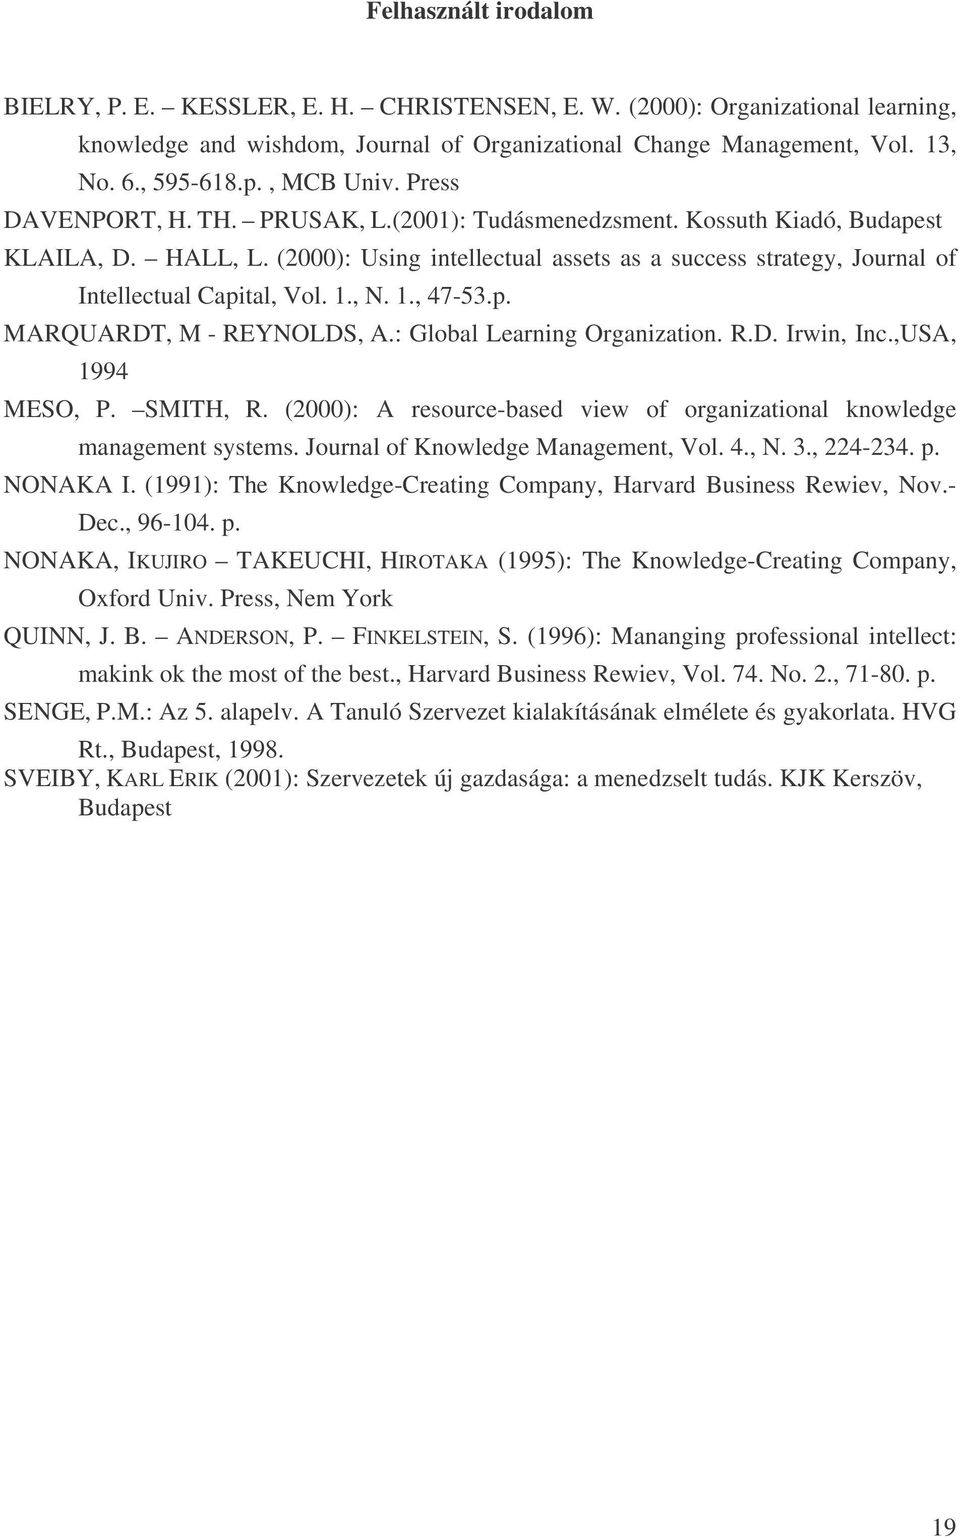 (2000): Using intellectual assets as a success strategy, Journal of Intellectual Capital, Vol. 1., N. 1., 47-53.p. MARQUARDT, M - REYNOLDS, A.: Global Learning Organization. R.D. Irwin, Inc.